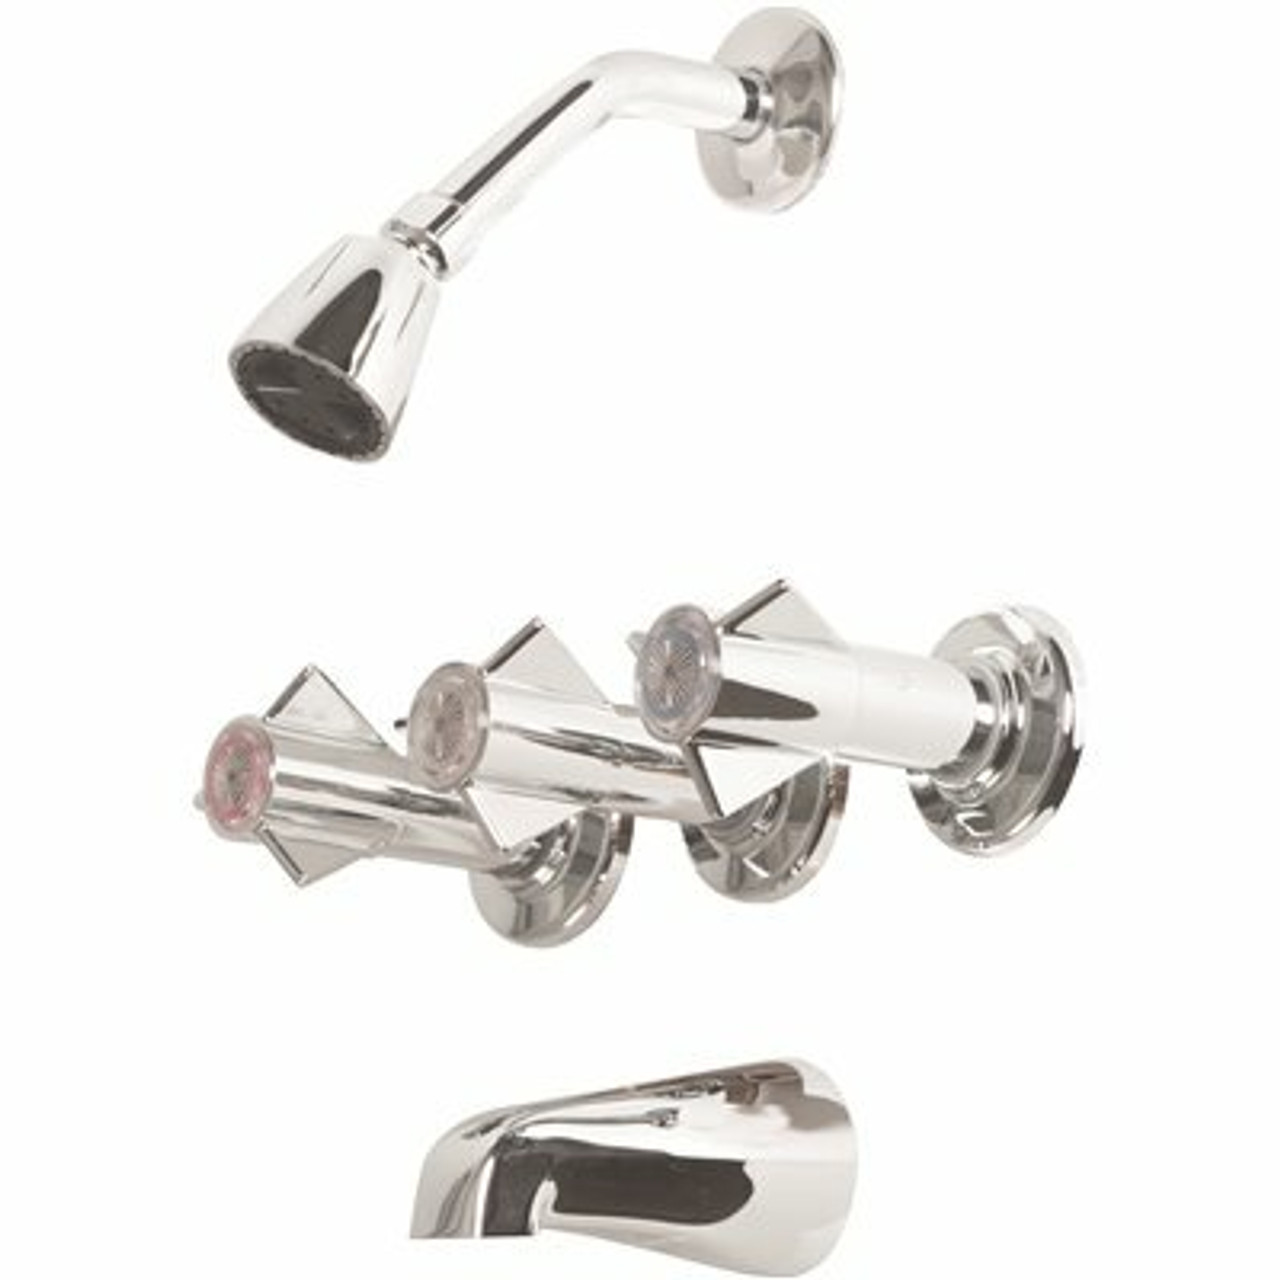 Sayco Classic Series 1-Spray Showerhead Face 3 In. Fixed Round Showerhead With Valve In Chrome